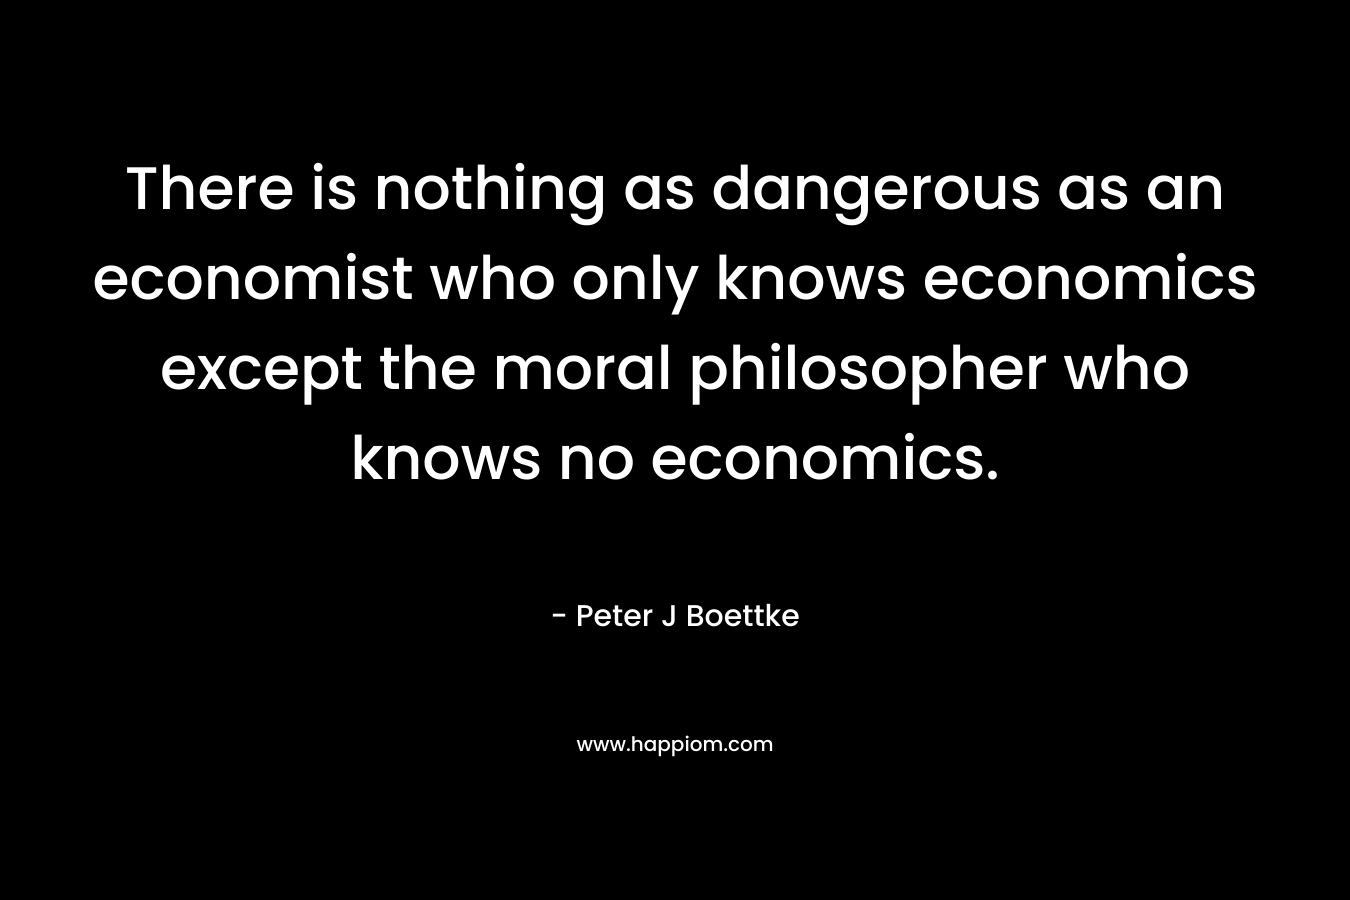 There is nothing as dangerous as an economist who only knows economics except the moral philosopher who knows no economics.